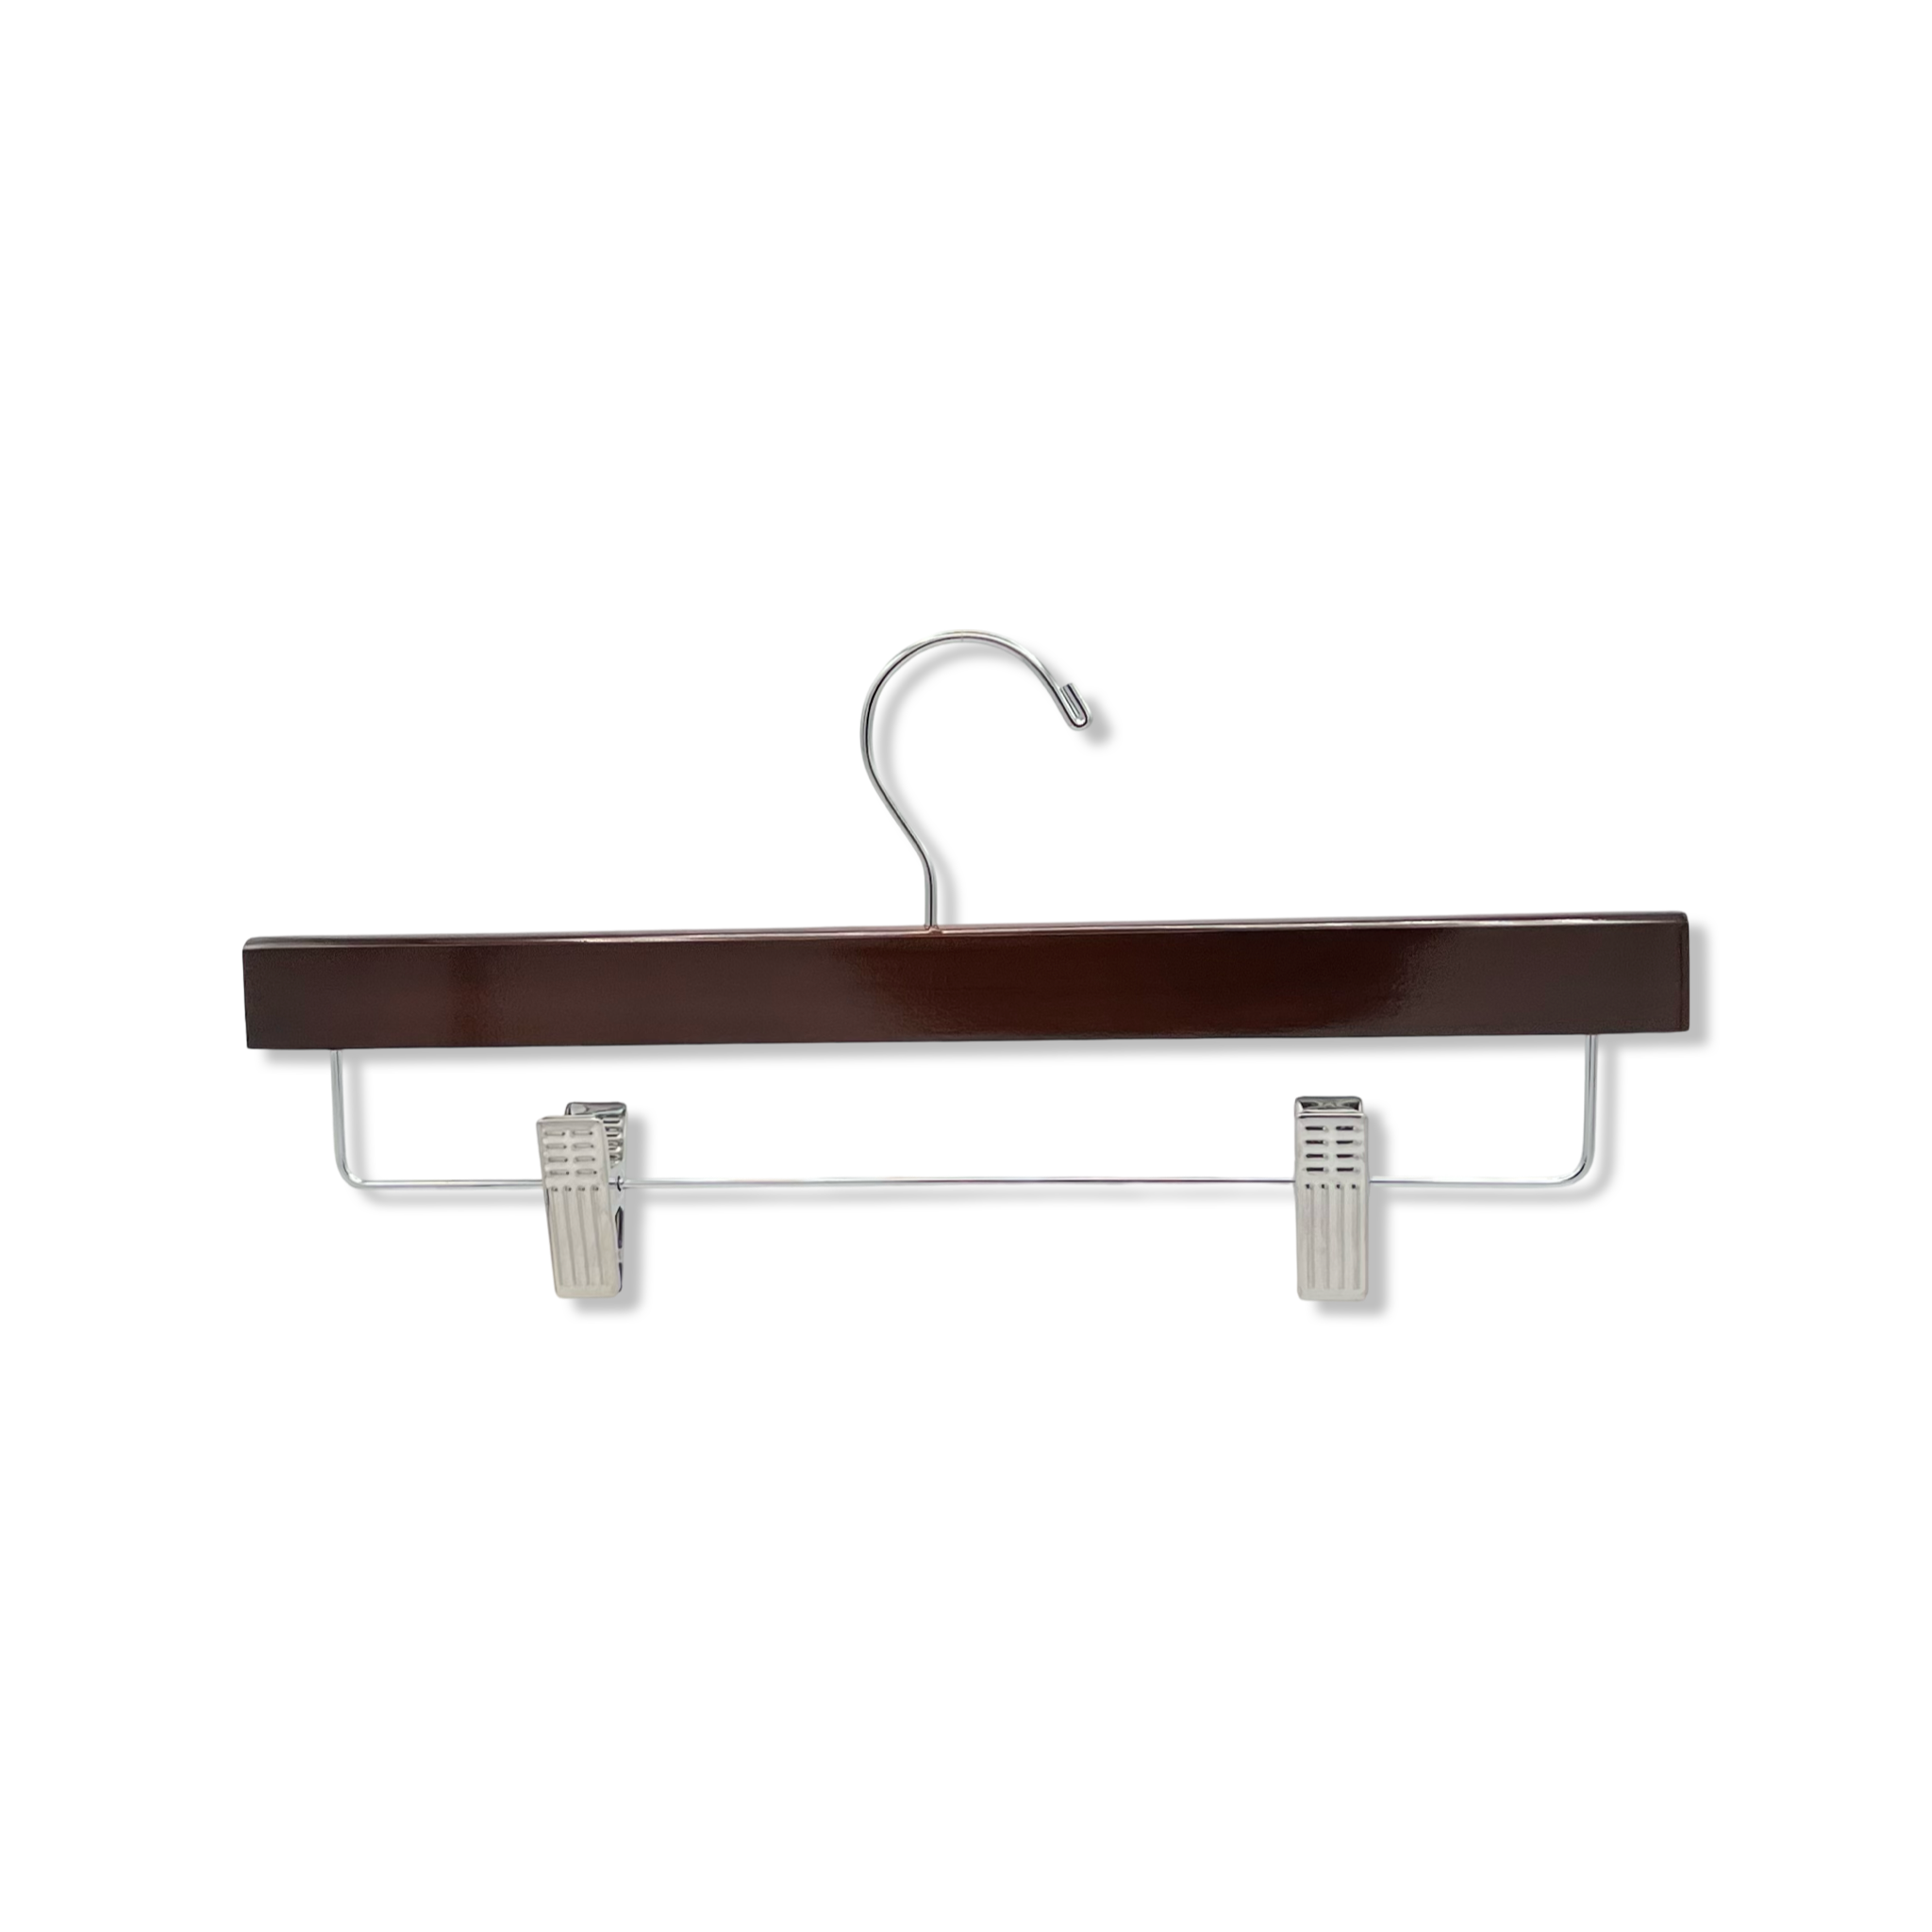 Customizable Dark Walnut Wooden Bottom Hanger with silver anti-stain, anti-slip, adjustable cushion clips for adults